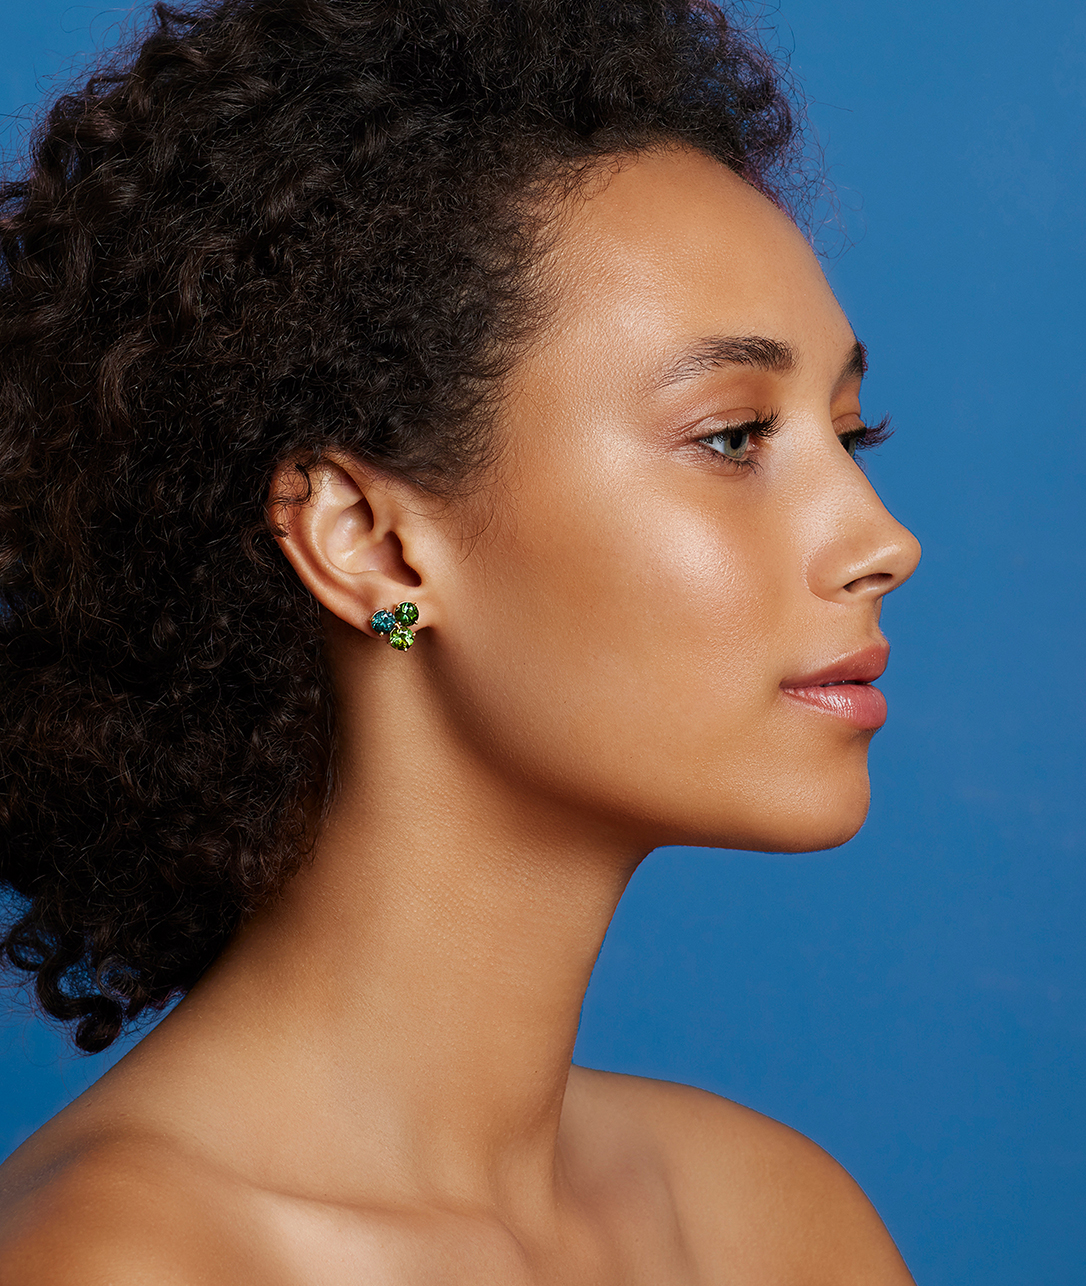                 One of our newest additions to the Gemmy Gem family, these studs frame your face in jewels.SHOP GEMMY GEM TRIO STUDS            